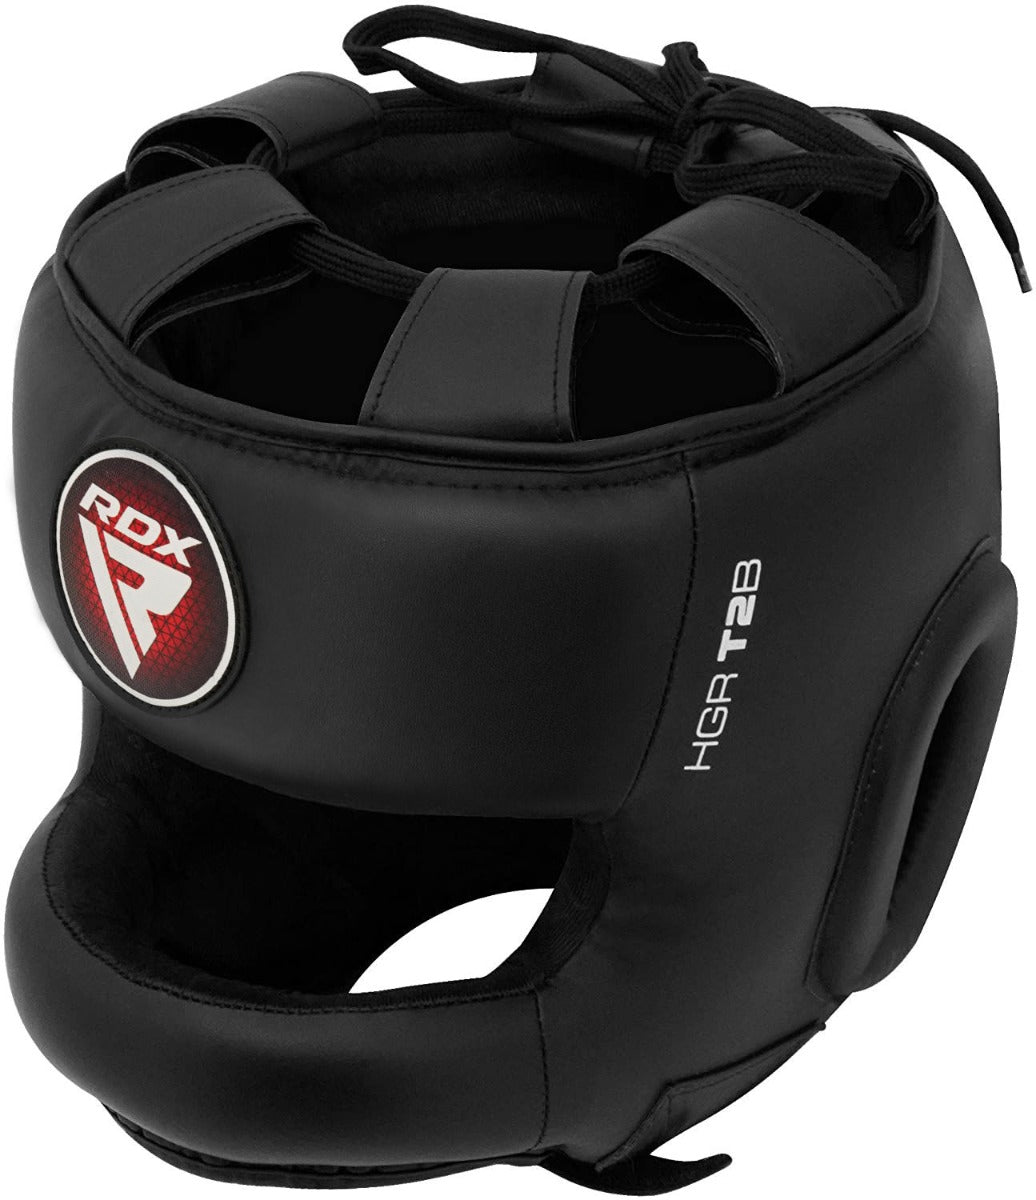 RDX T2 Head Guard with Nose Protection Bar